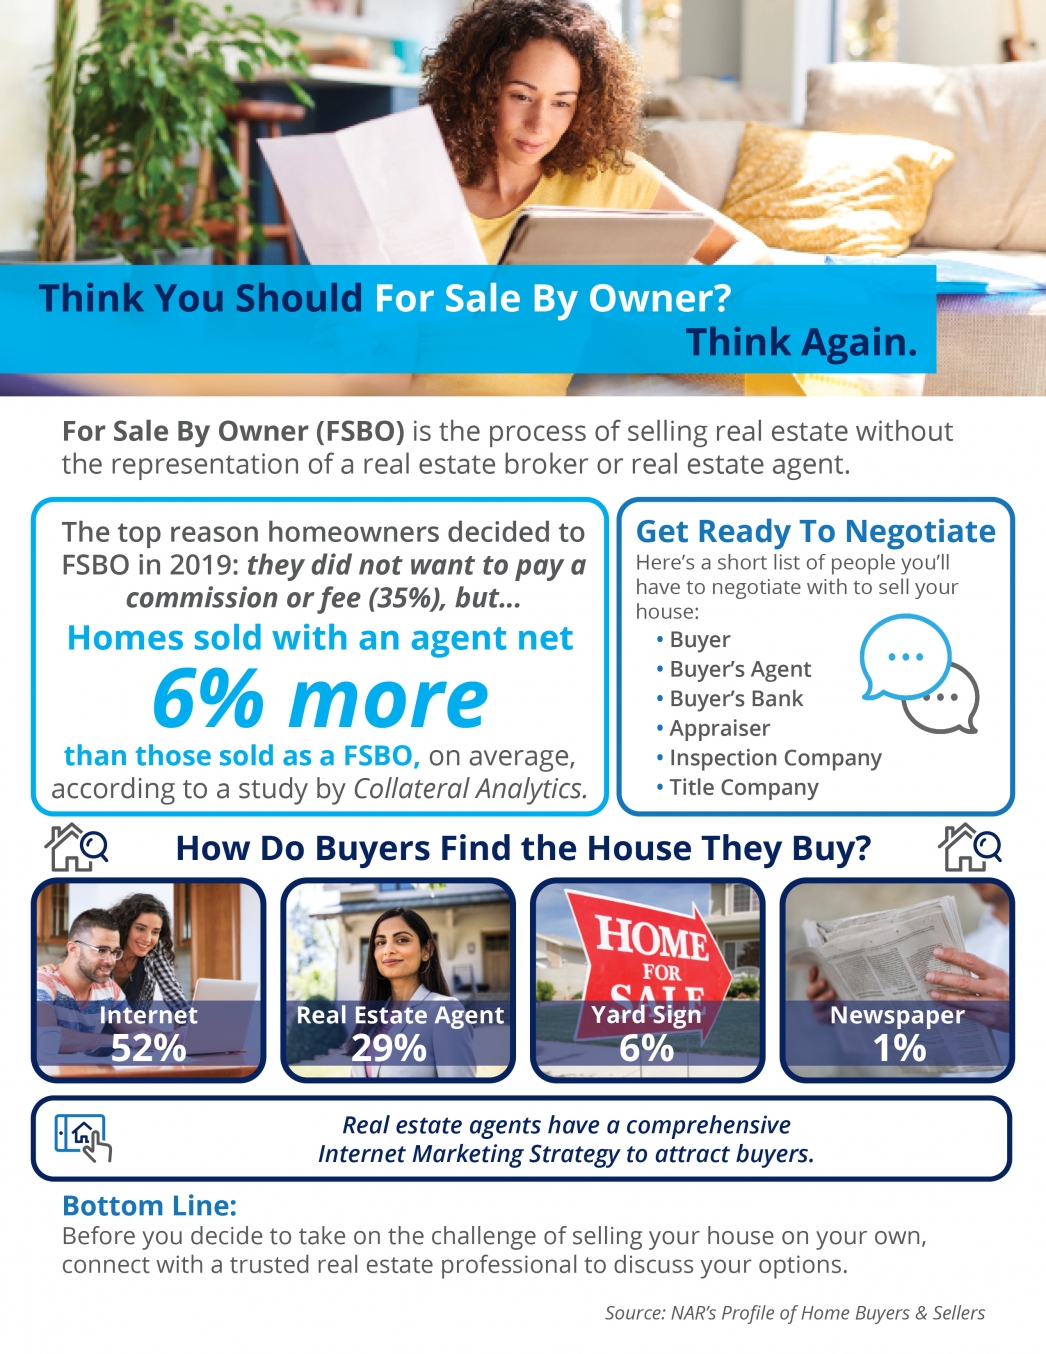 Think again if considering a Sale By Owner